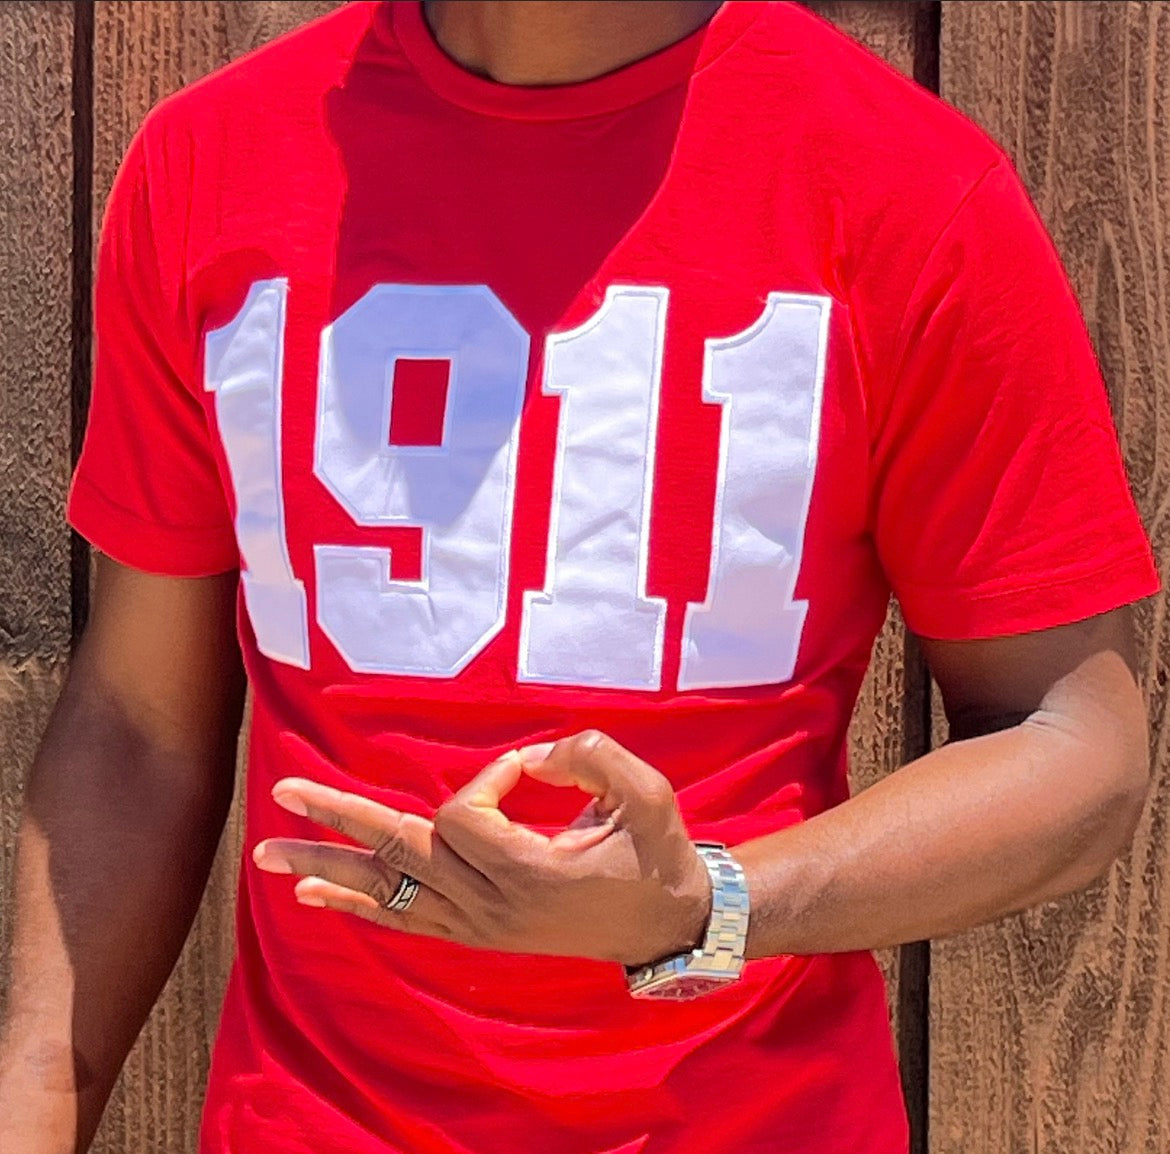 Embroidery Alpha Psi Kappa Nupekave is Wht – Red - 1911 Shirt / T